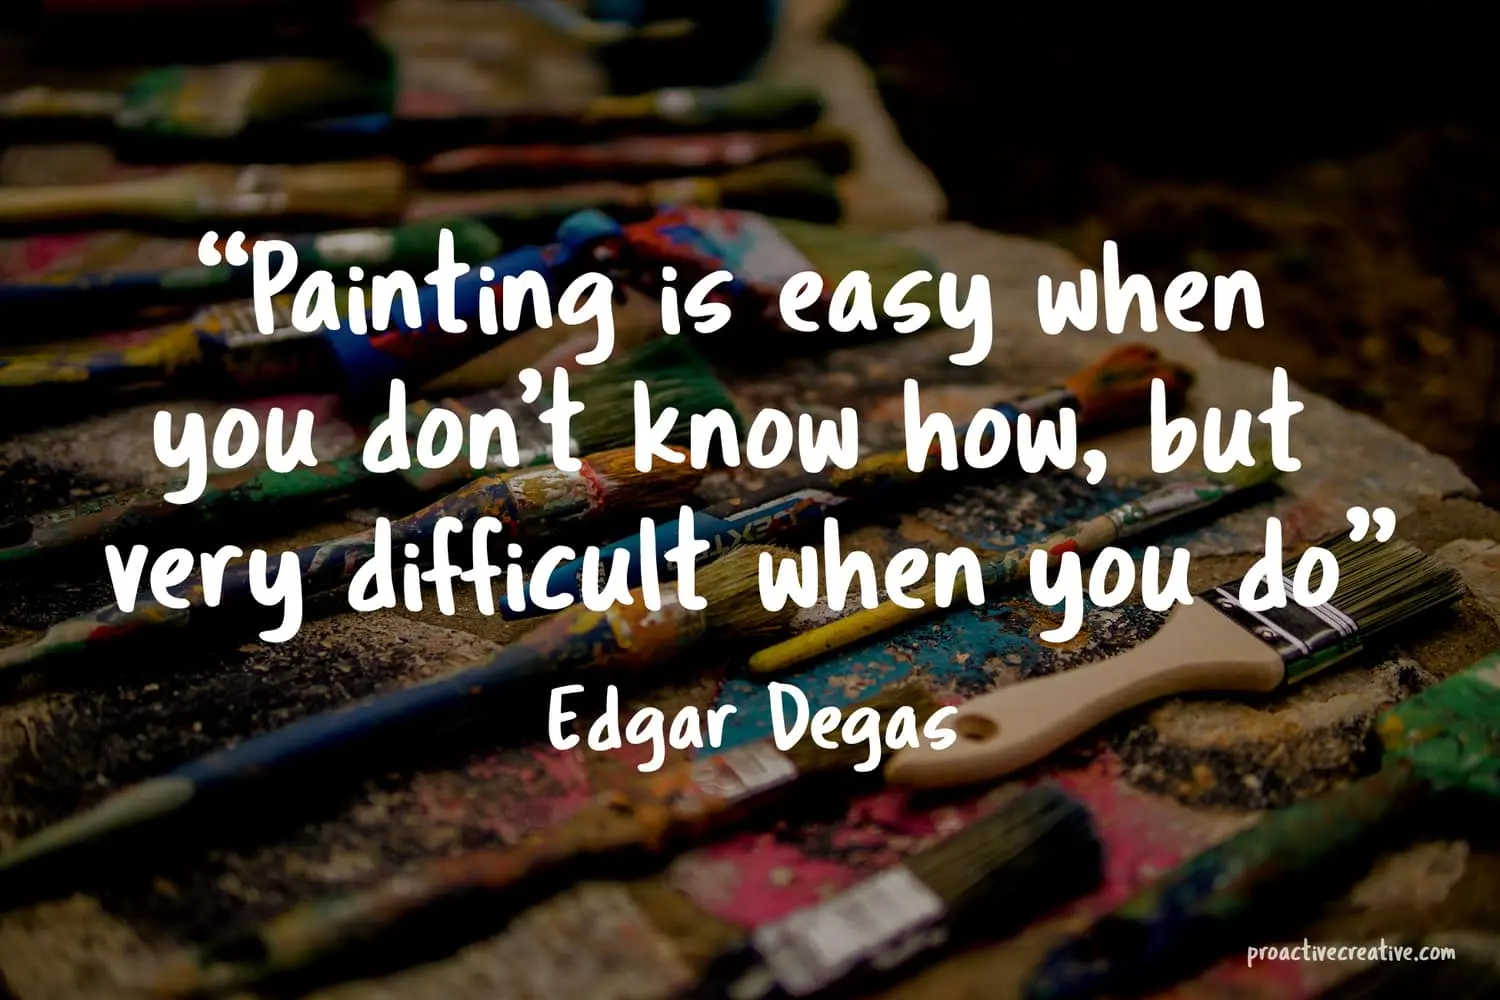 Quotes about art and creativity - Edgar Degas